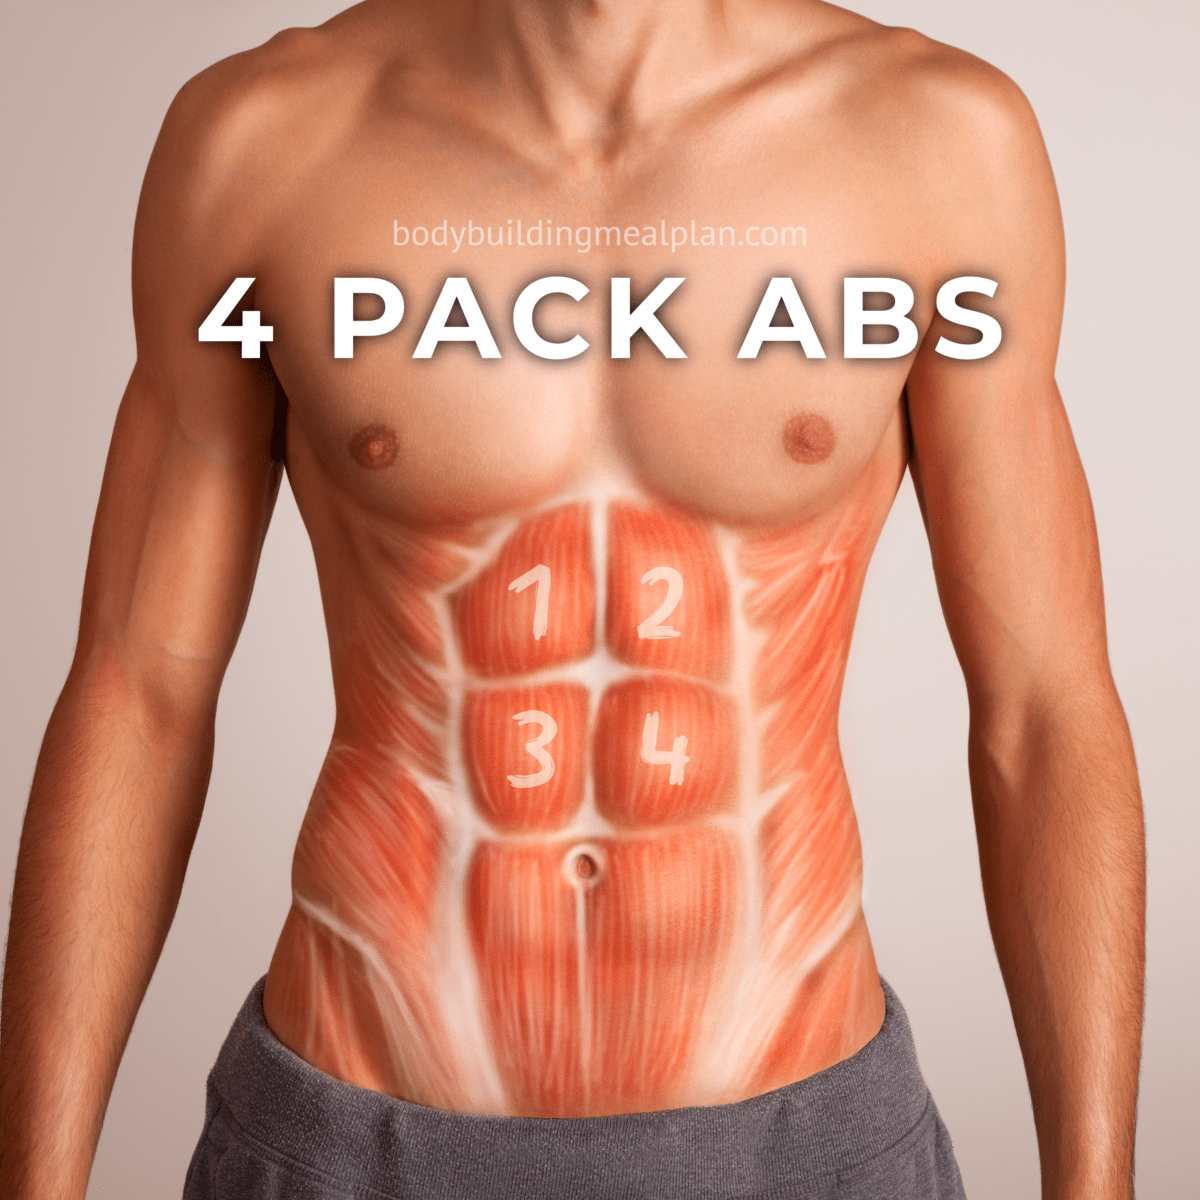 4 Pack Abs Vs 6810 Pack Men And Women Genetics Body Fat Percentage